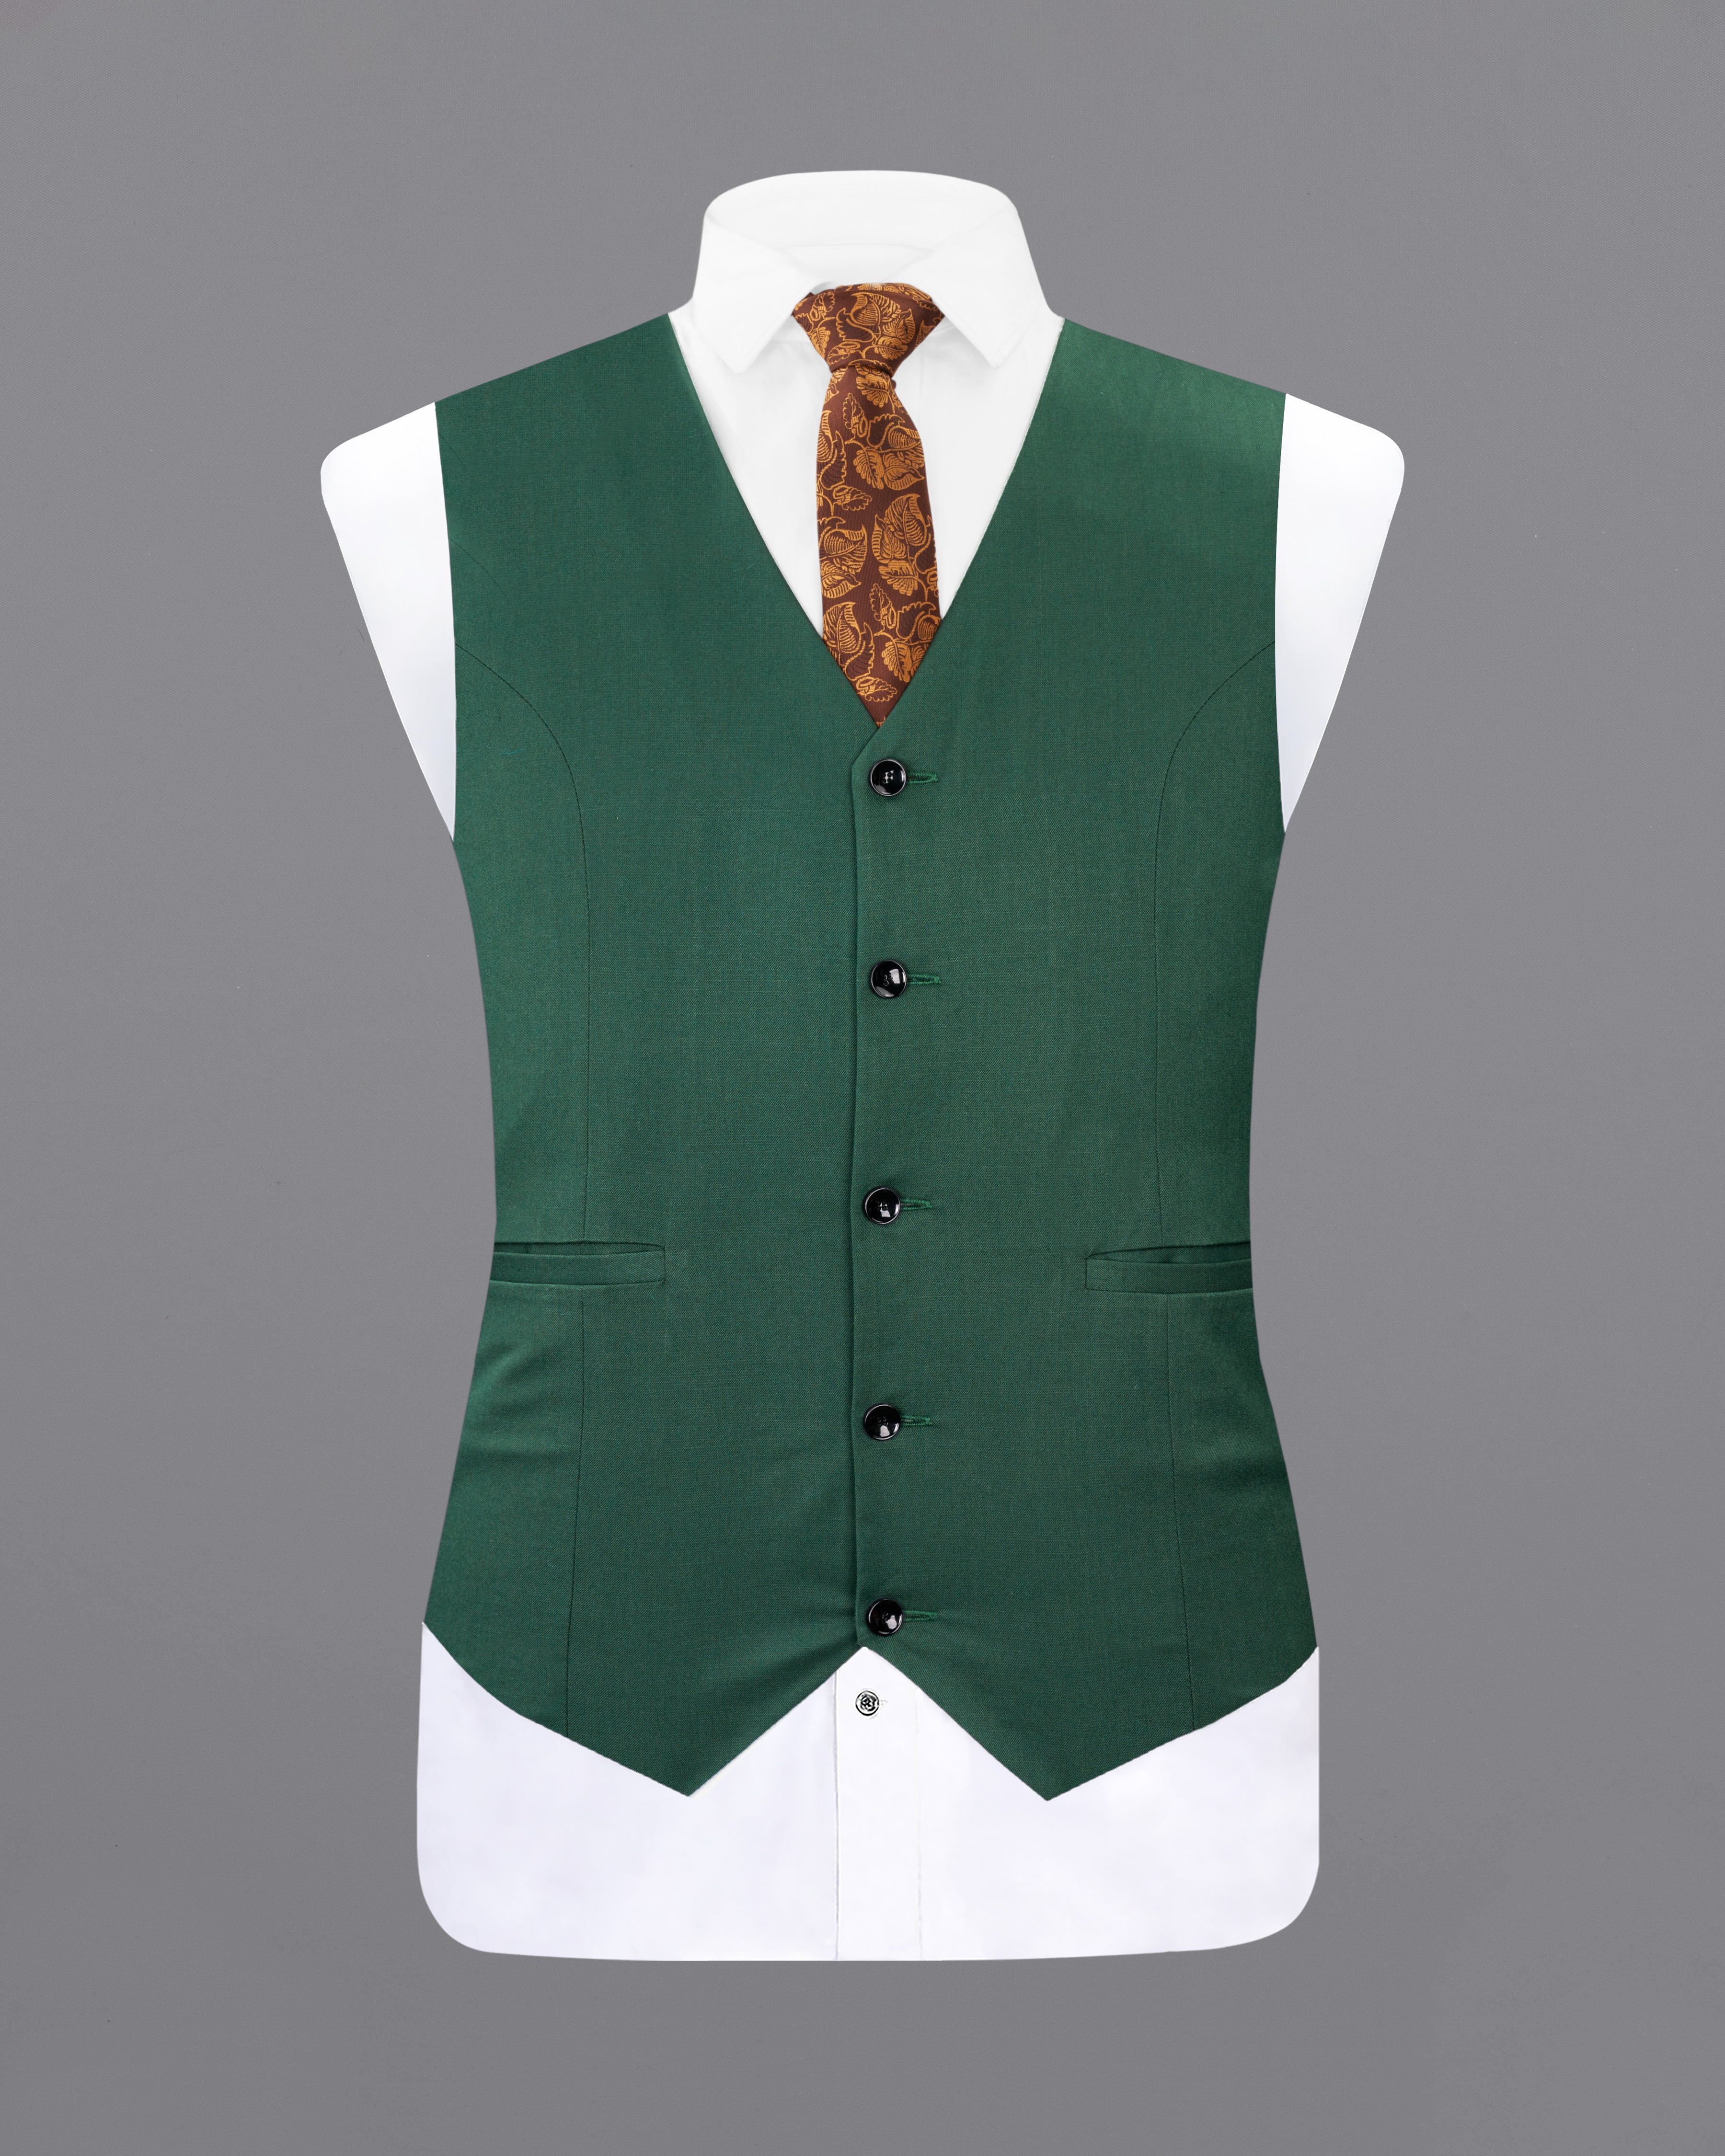 Everglade Green Wool Rich Stretchable Waistcoat V2710-36, V2710-38, V2710-40, V2710-42, V2710-44, V2710-46, V2710-48, V2710-50, V2710-52, V2710-54, V2710-56, V2710-58, V2710-60